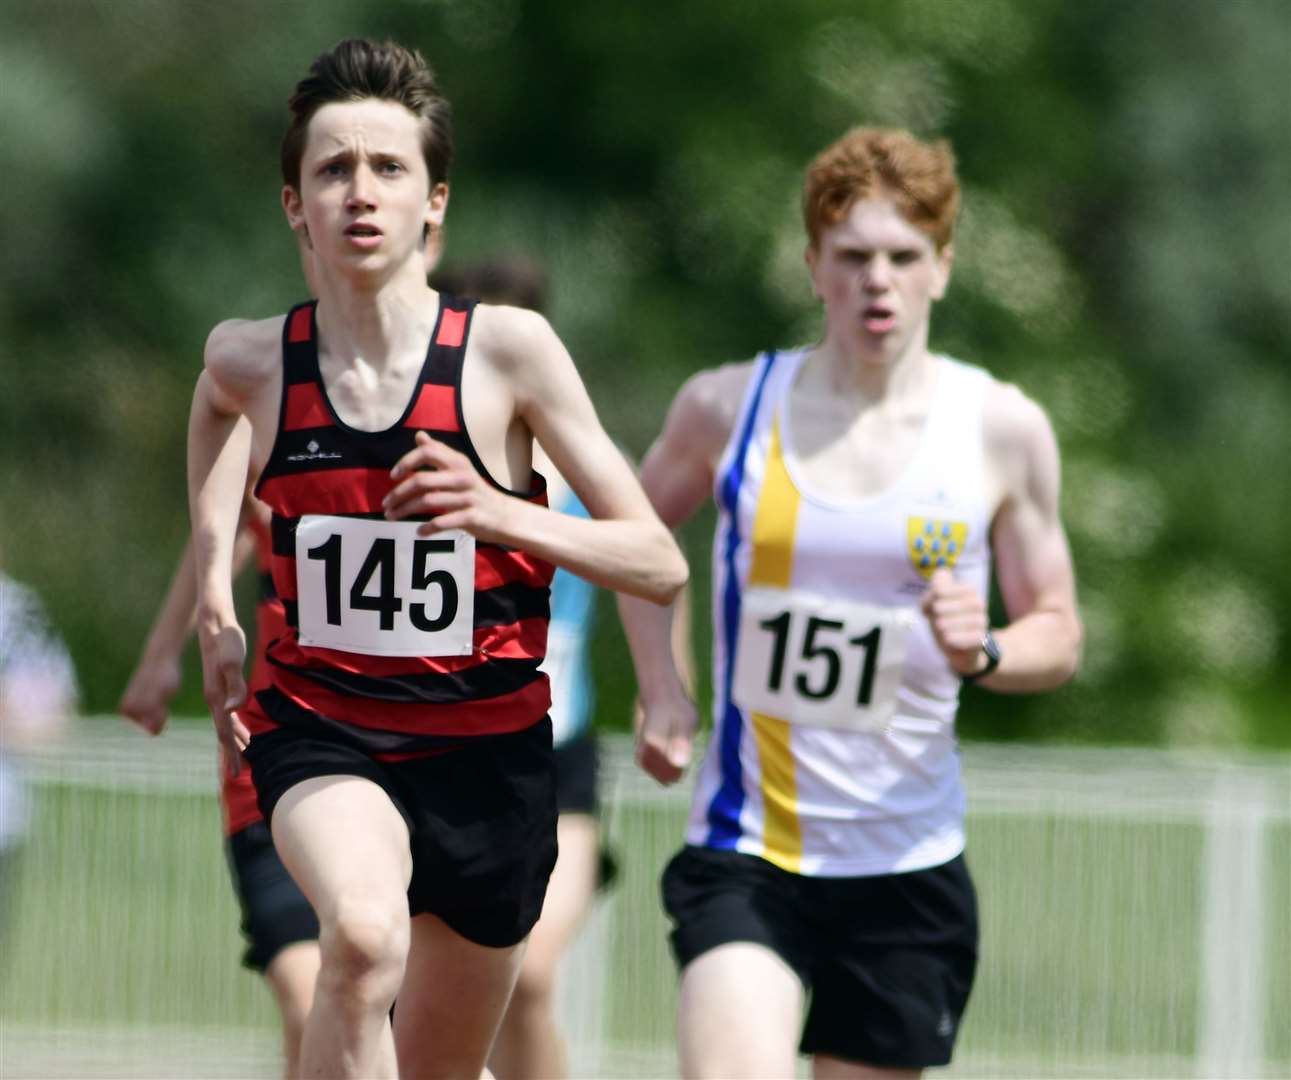 Robin Bebbington (Bromley) and Thomas Mitchell (Sevenoaks) in the 800m Picture: Barry Goodwin